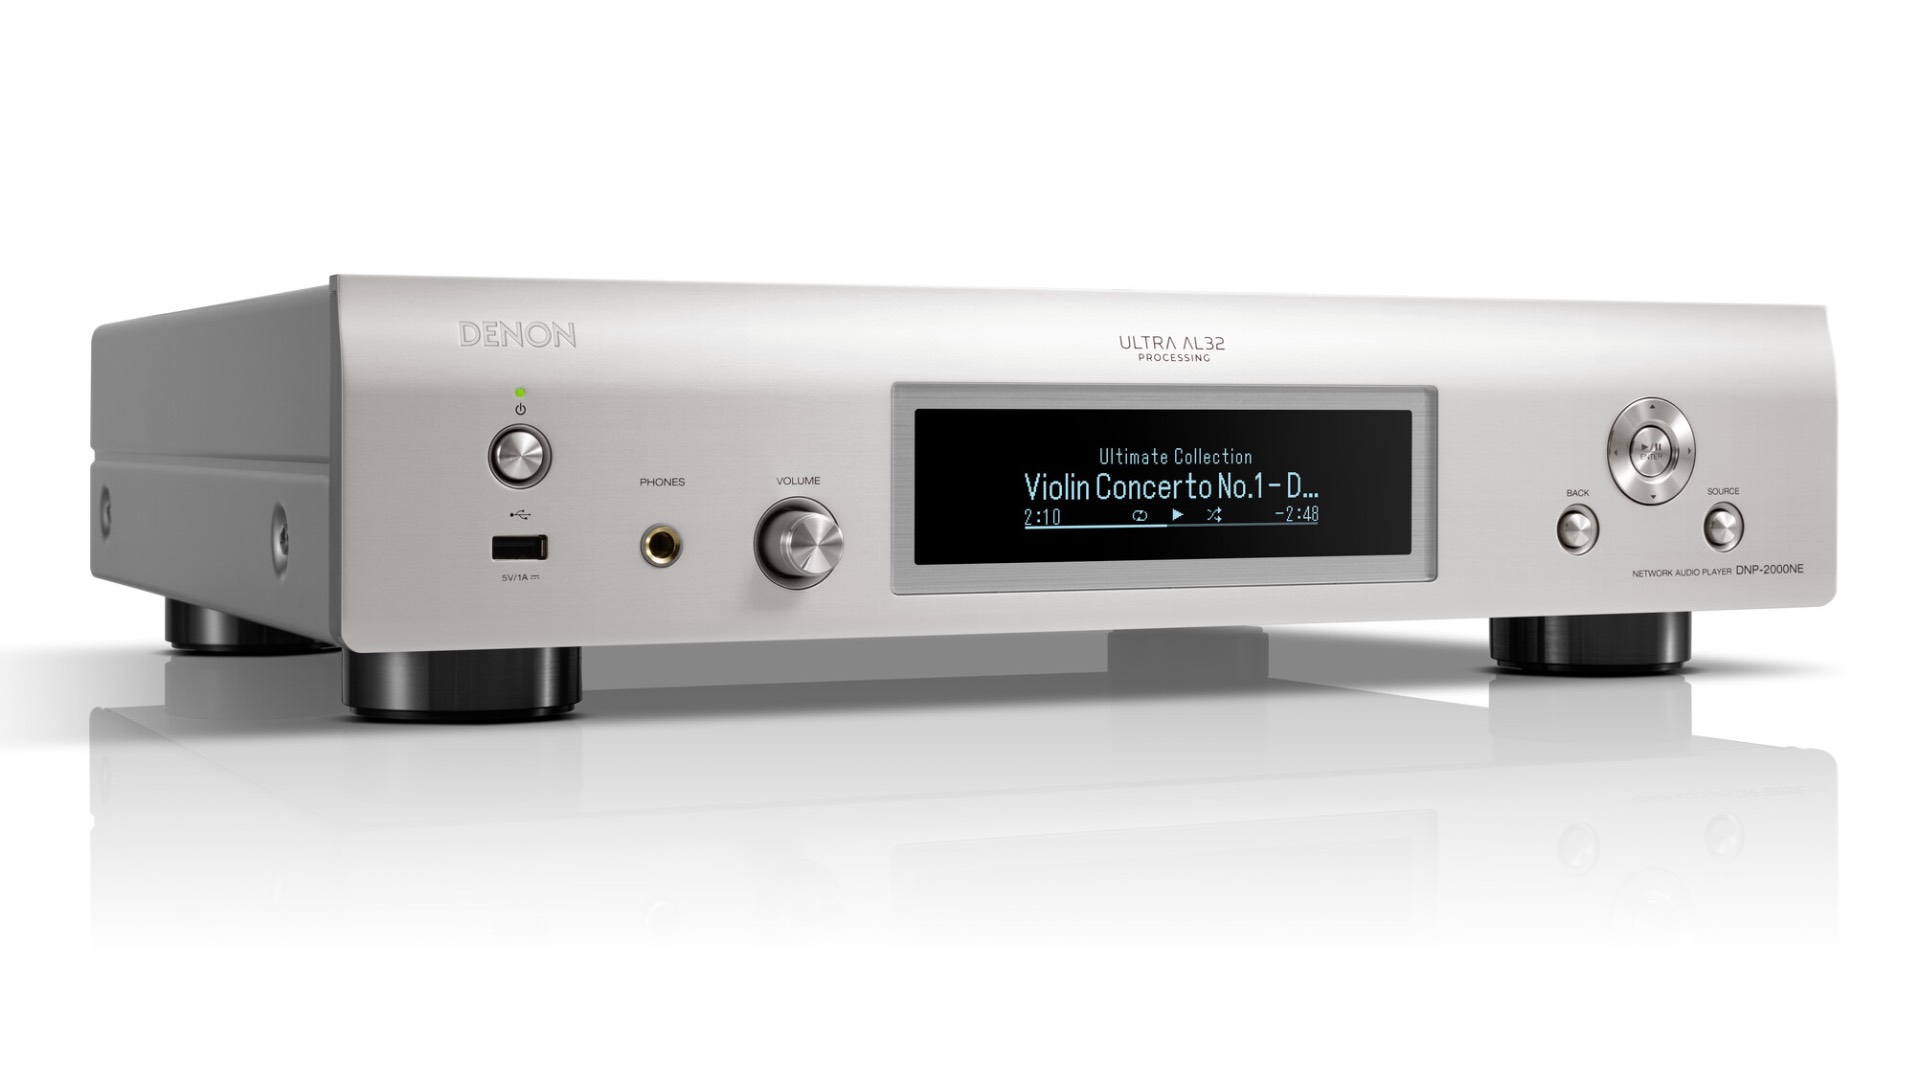 With the DNP-2000NE, Denon introduces a high quality and flexible network player. (Image Credit: Denon)